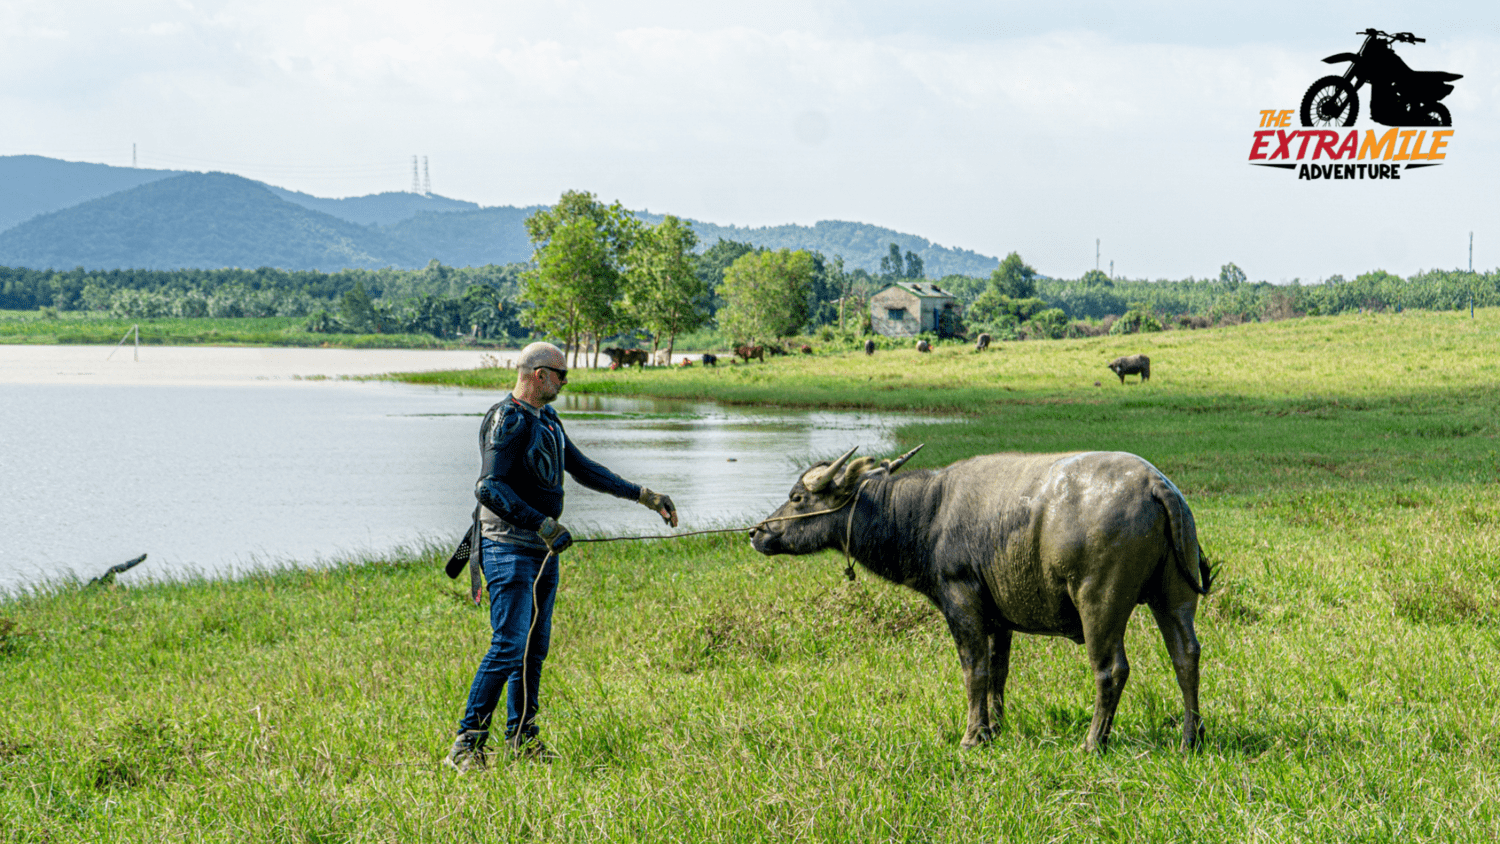 113 - CENTER - Quang Binh - buffalo encounter with tourist near lake and grass green field The Extra Mile Adventure Motorbike Tours Vietnam